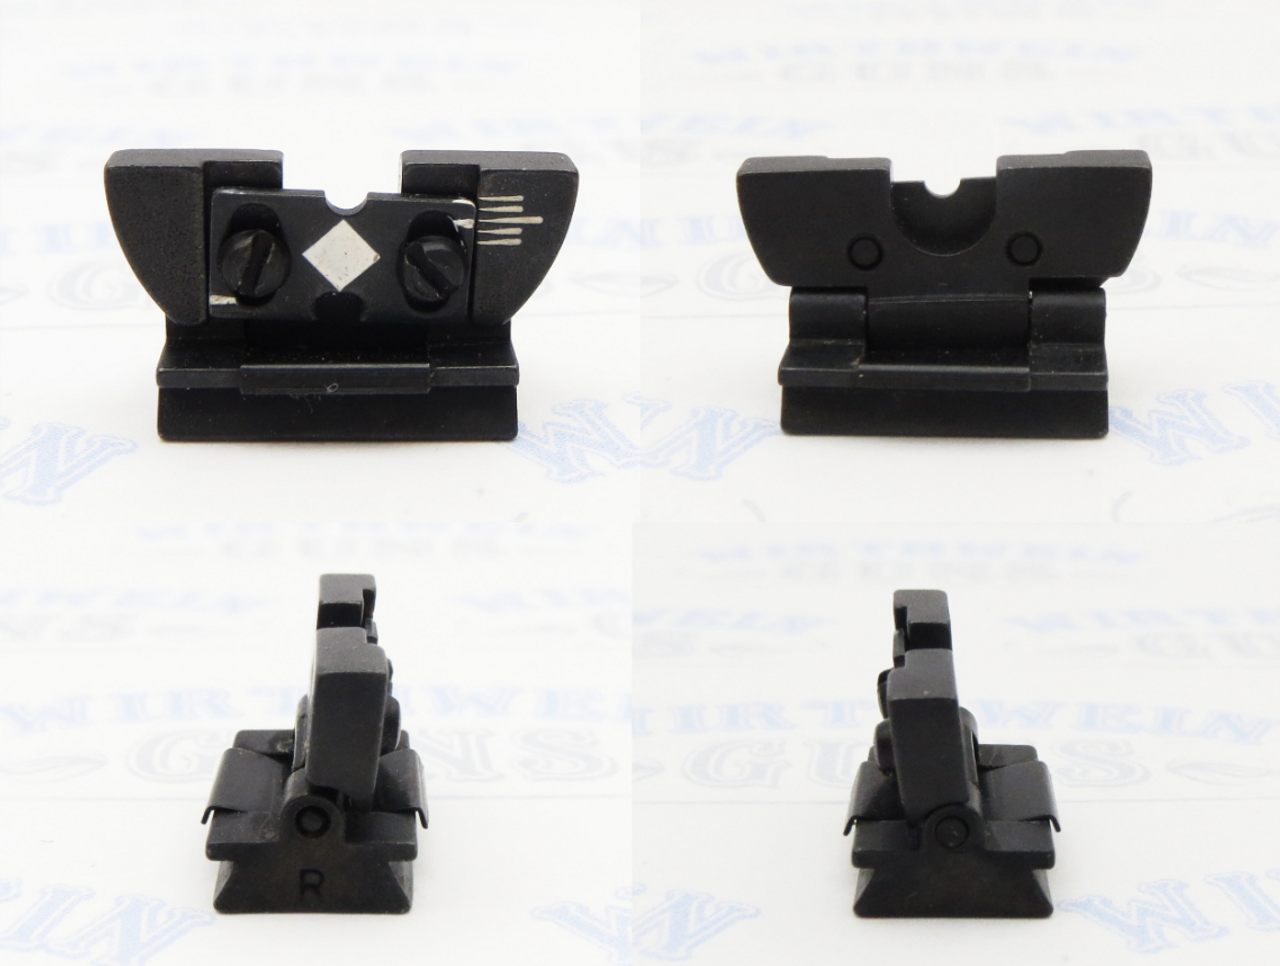 Ruger Adjustable Rear Sight for 10/22 Rifle